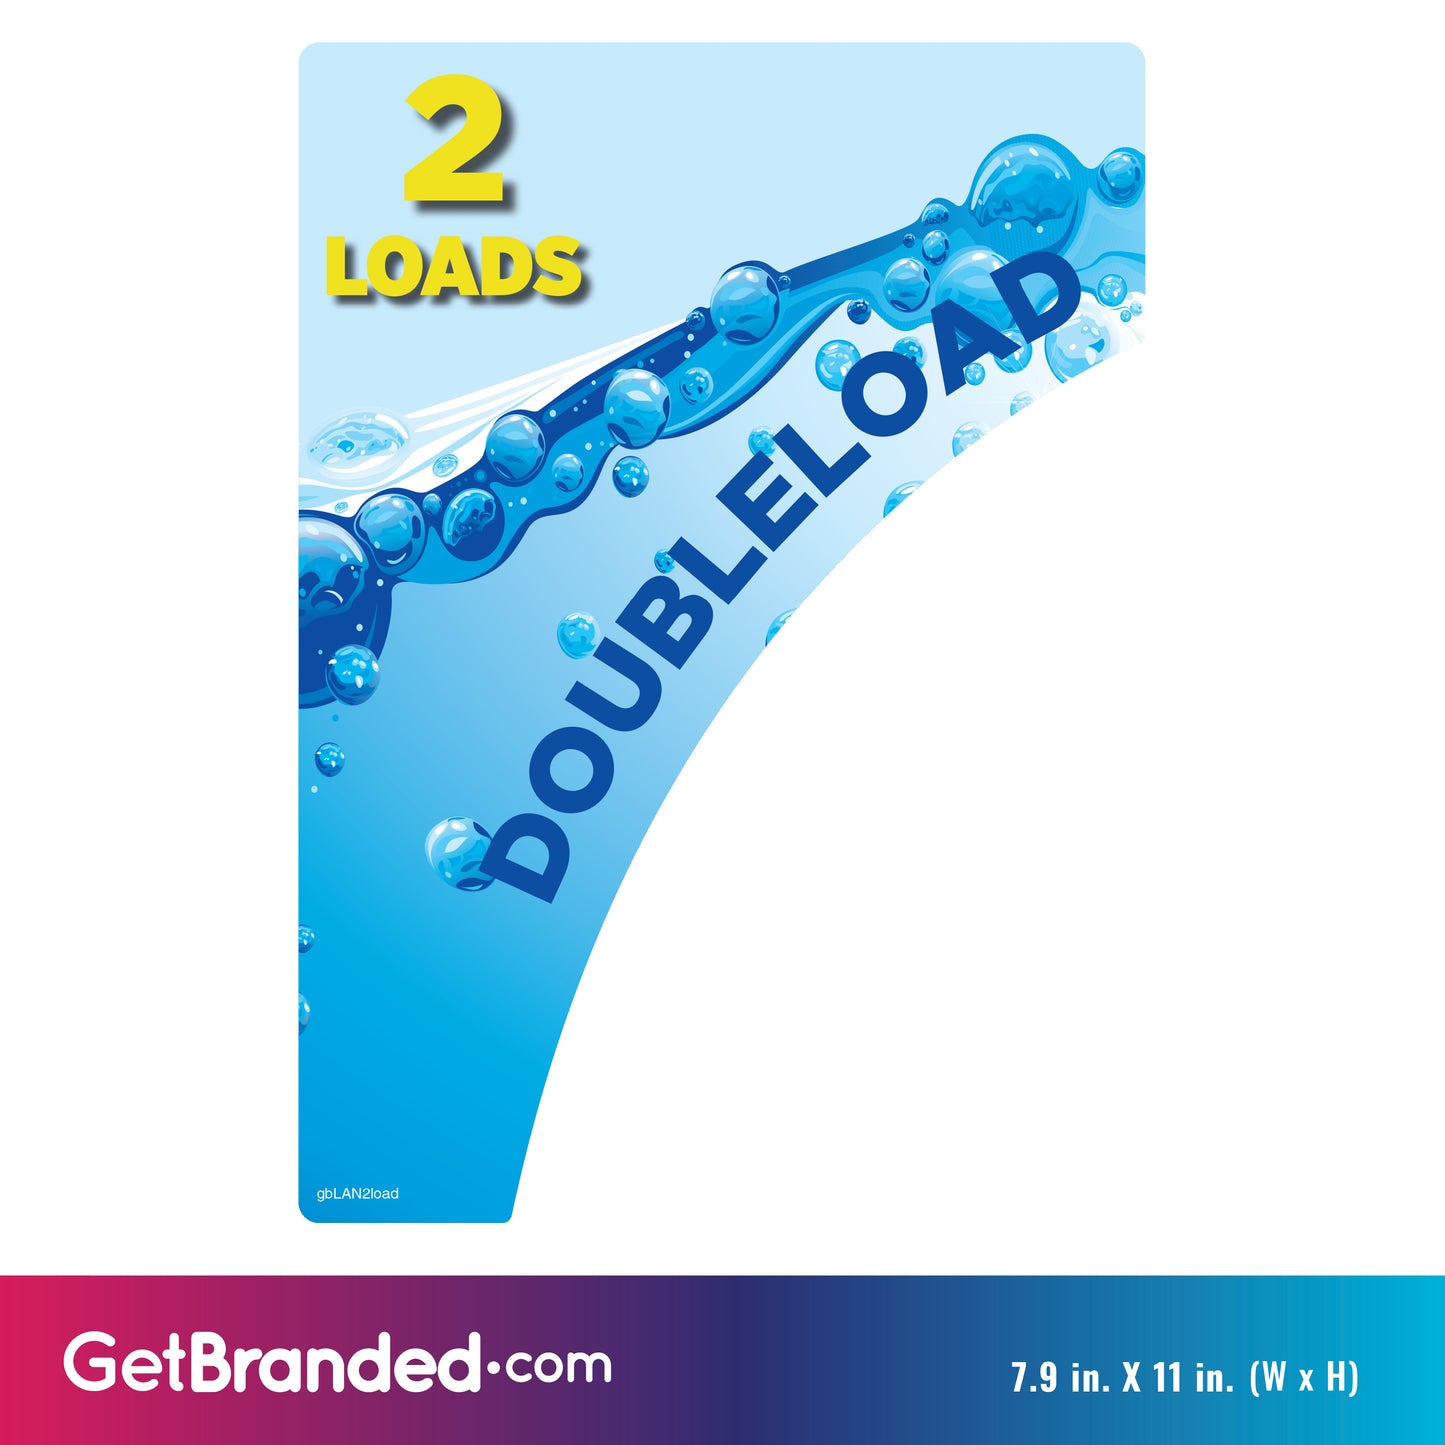 Decal for placement on washing machines at Laundromat displaying Doubleload - 2 Loads in size. Measurement details.